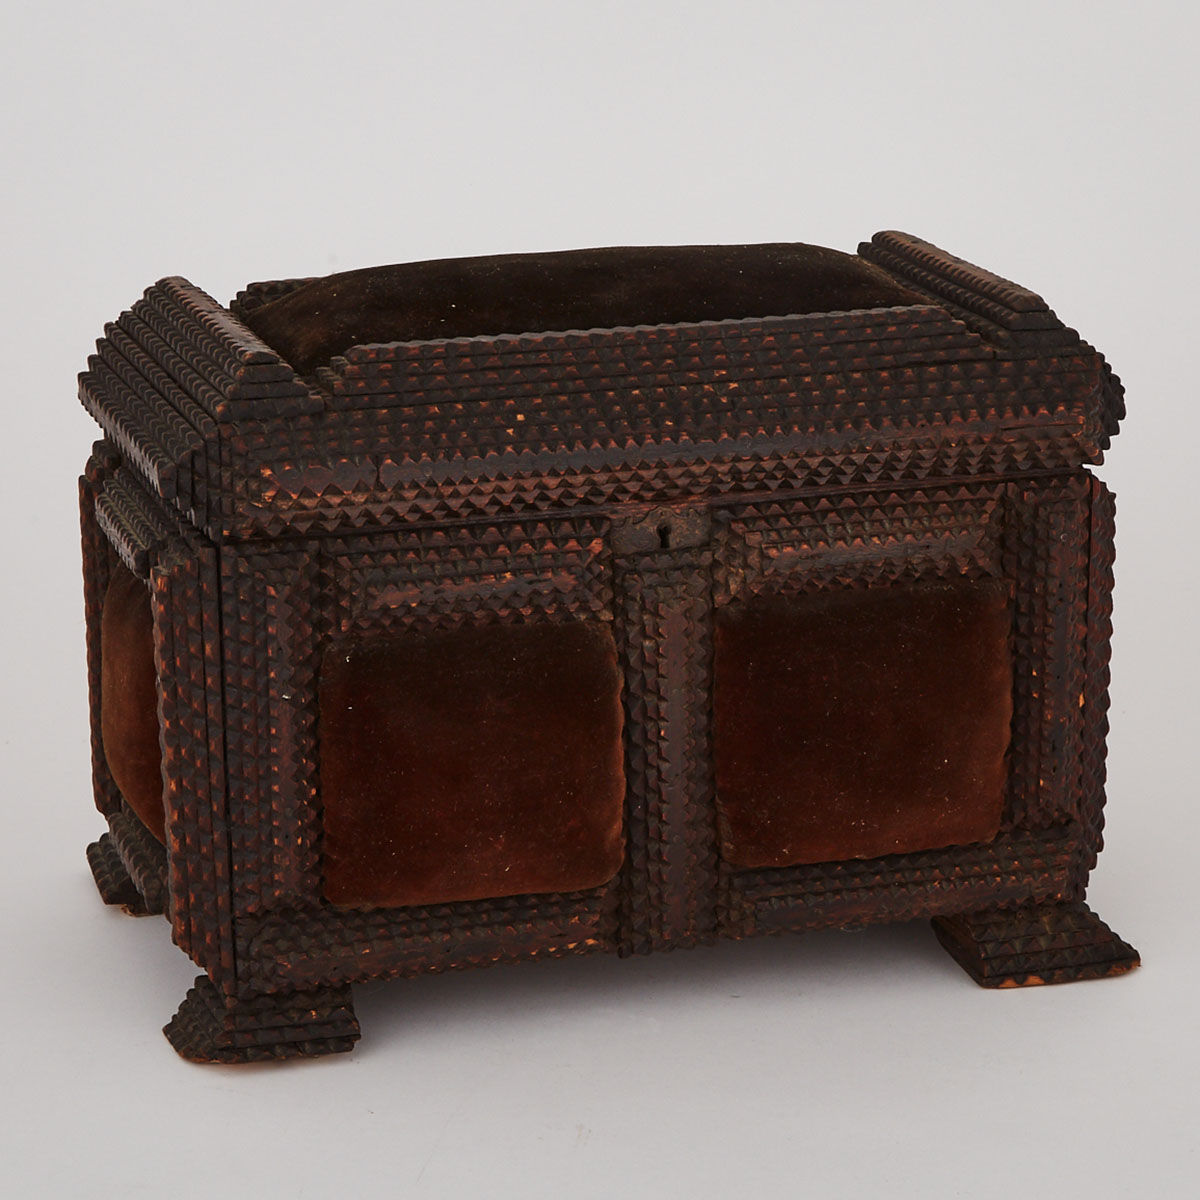 ‘Tramp Art’ Sewing Box, early 20th century